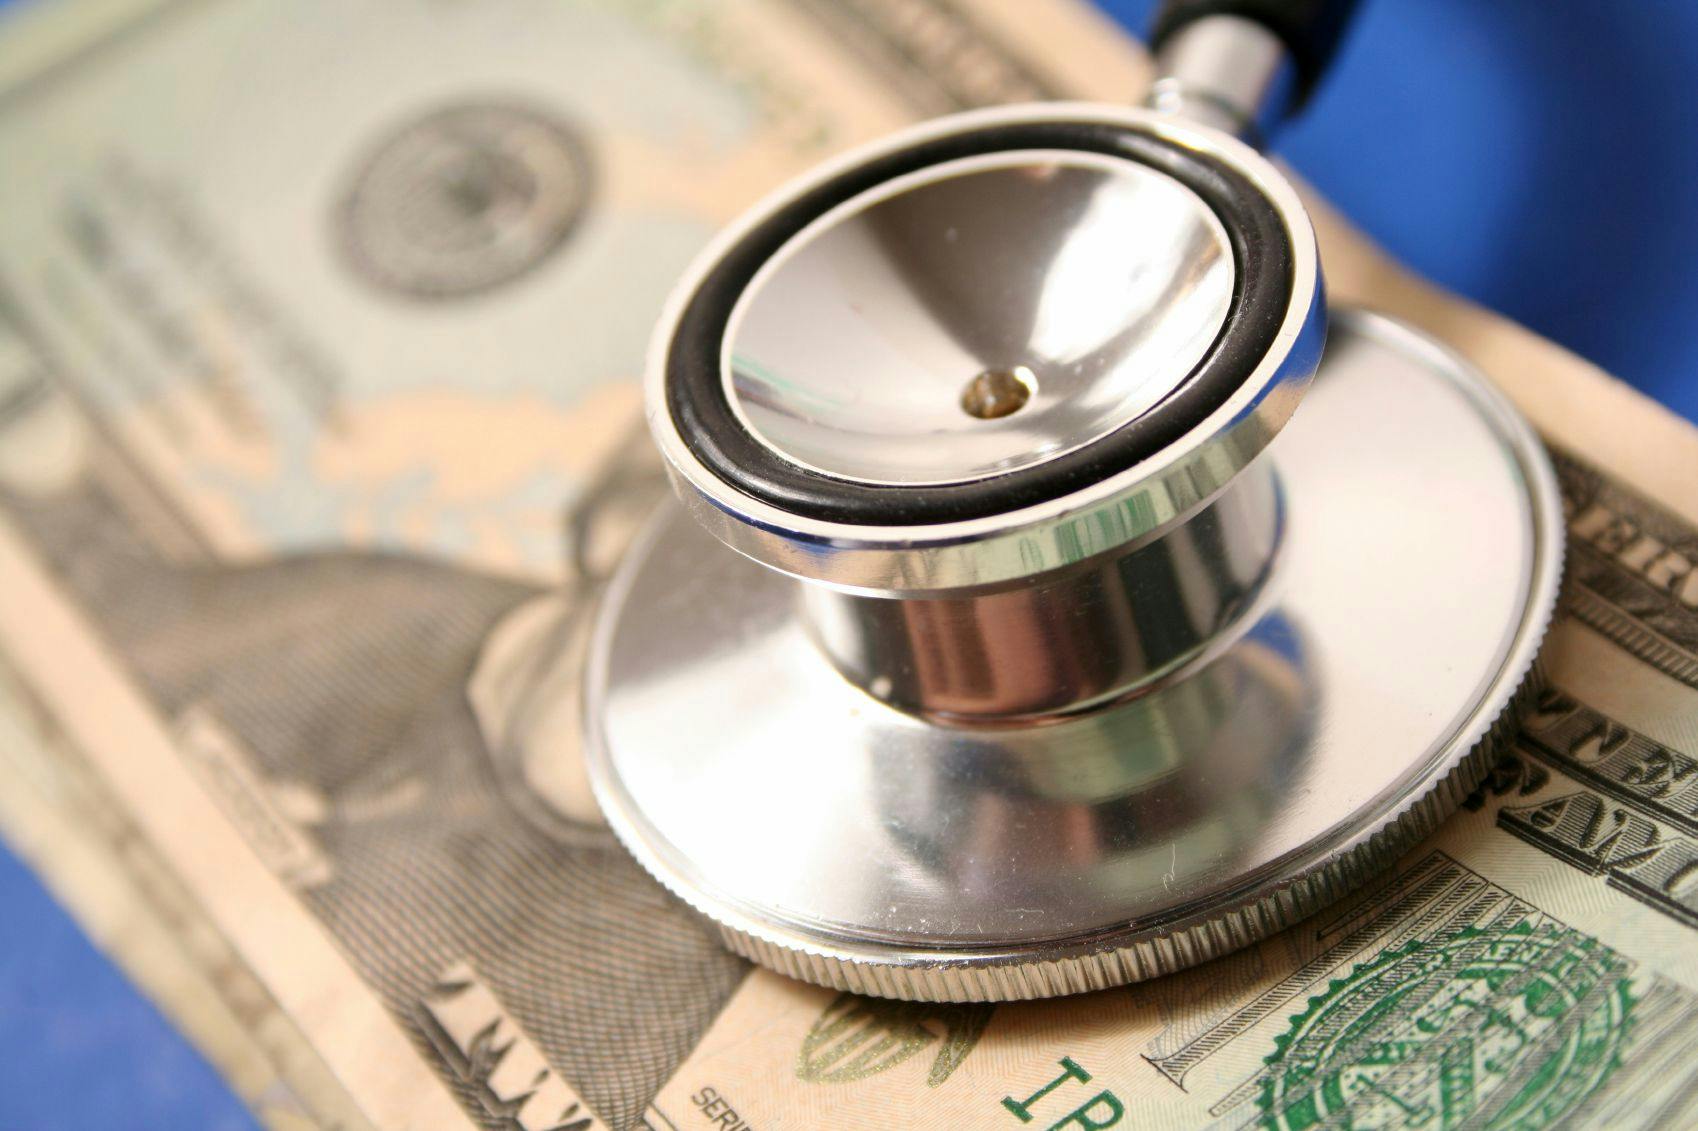 Health Care Costs Stock Photos and Images - 123RF | © 123RF Stock Photos